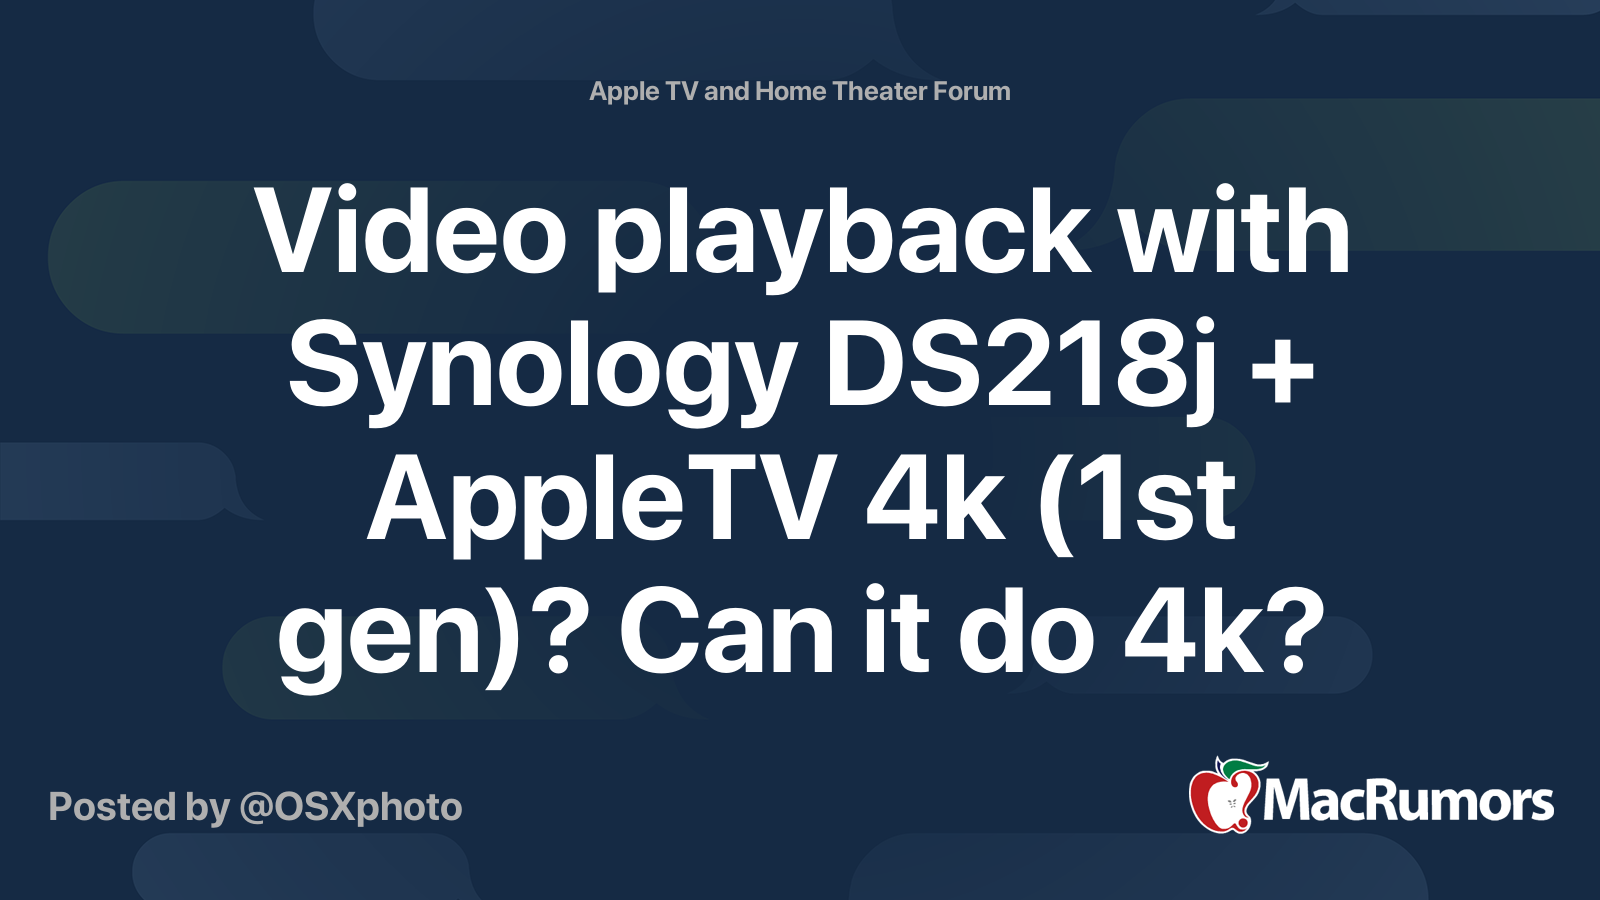 jazz anklageren Opdatering Video playback with Synology DS218j + AppleTV 4k (1st gen)? Can it do 4k? |  MacRumors Forums